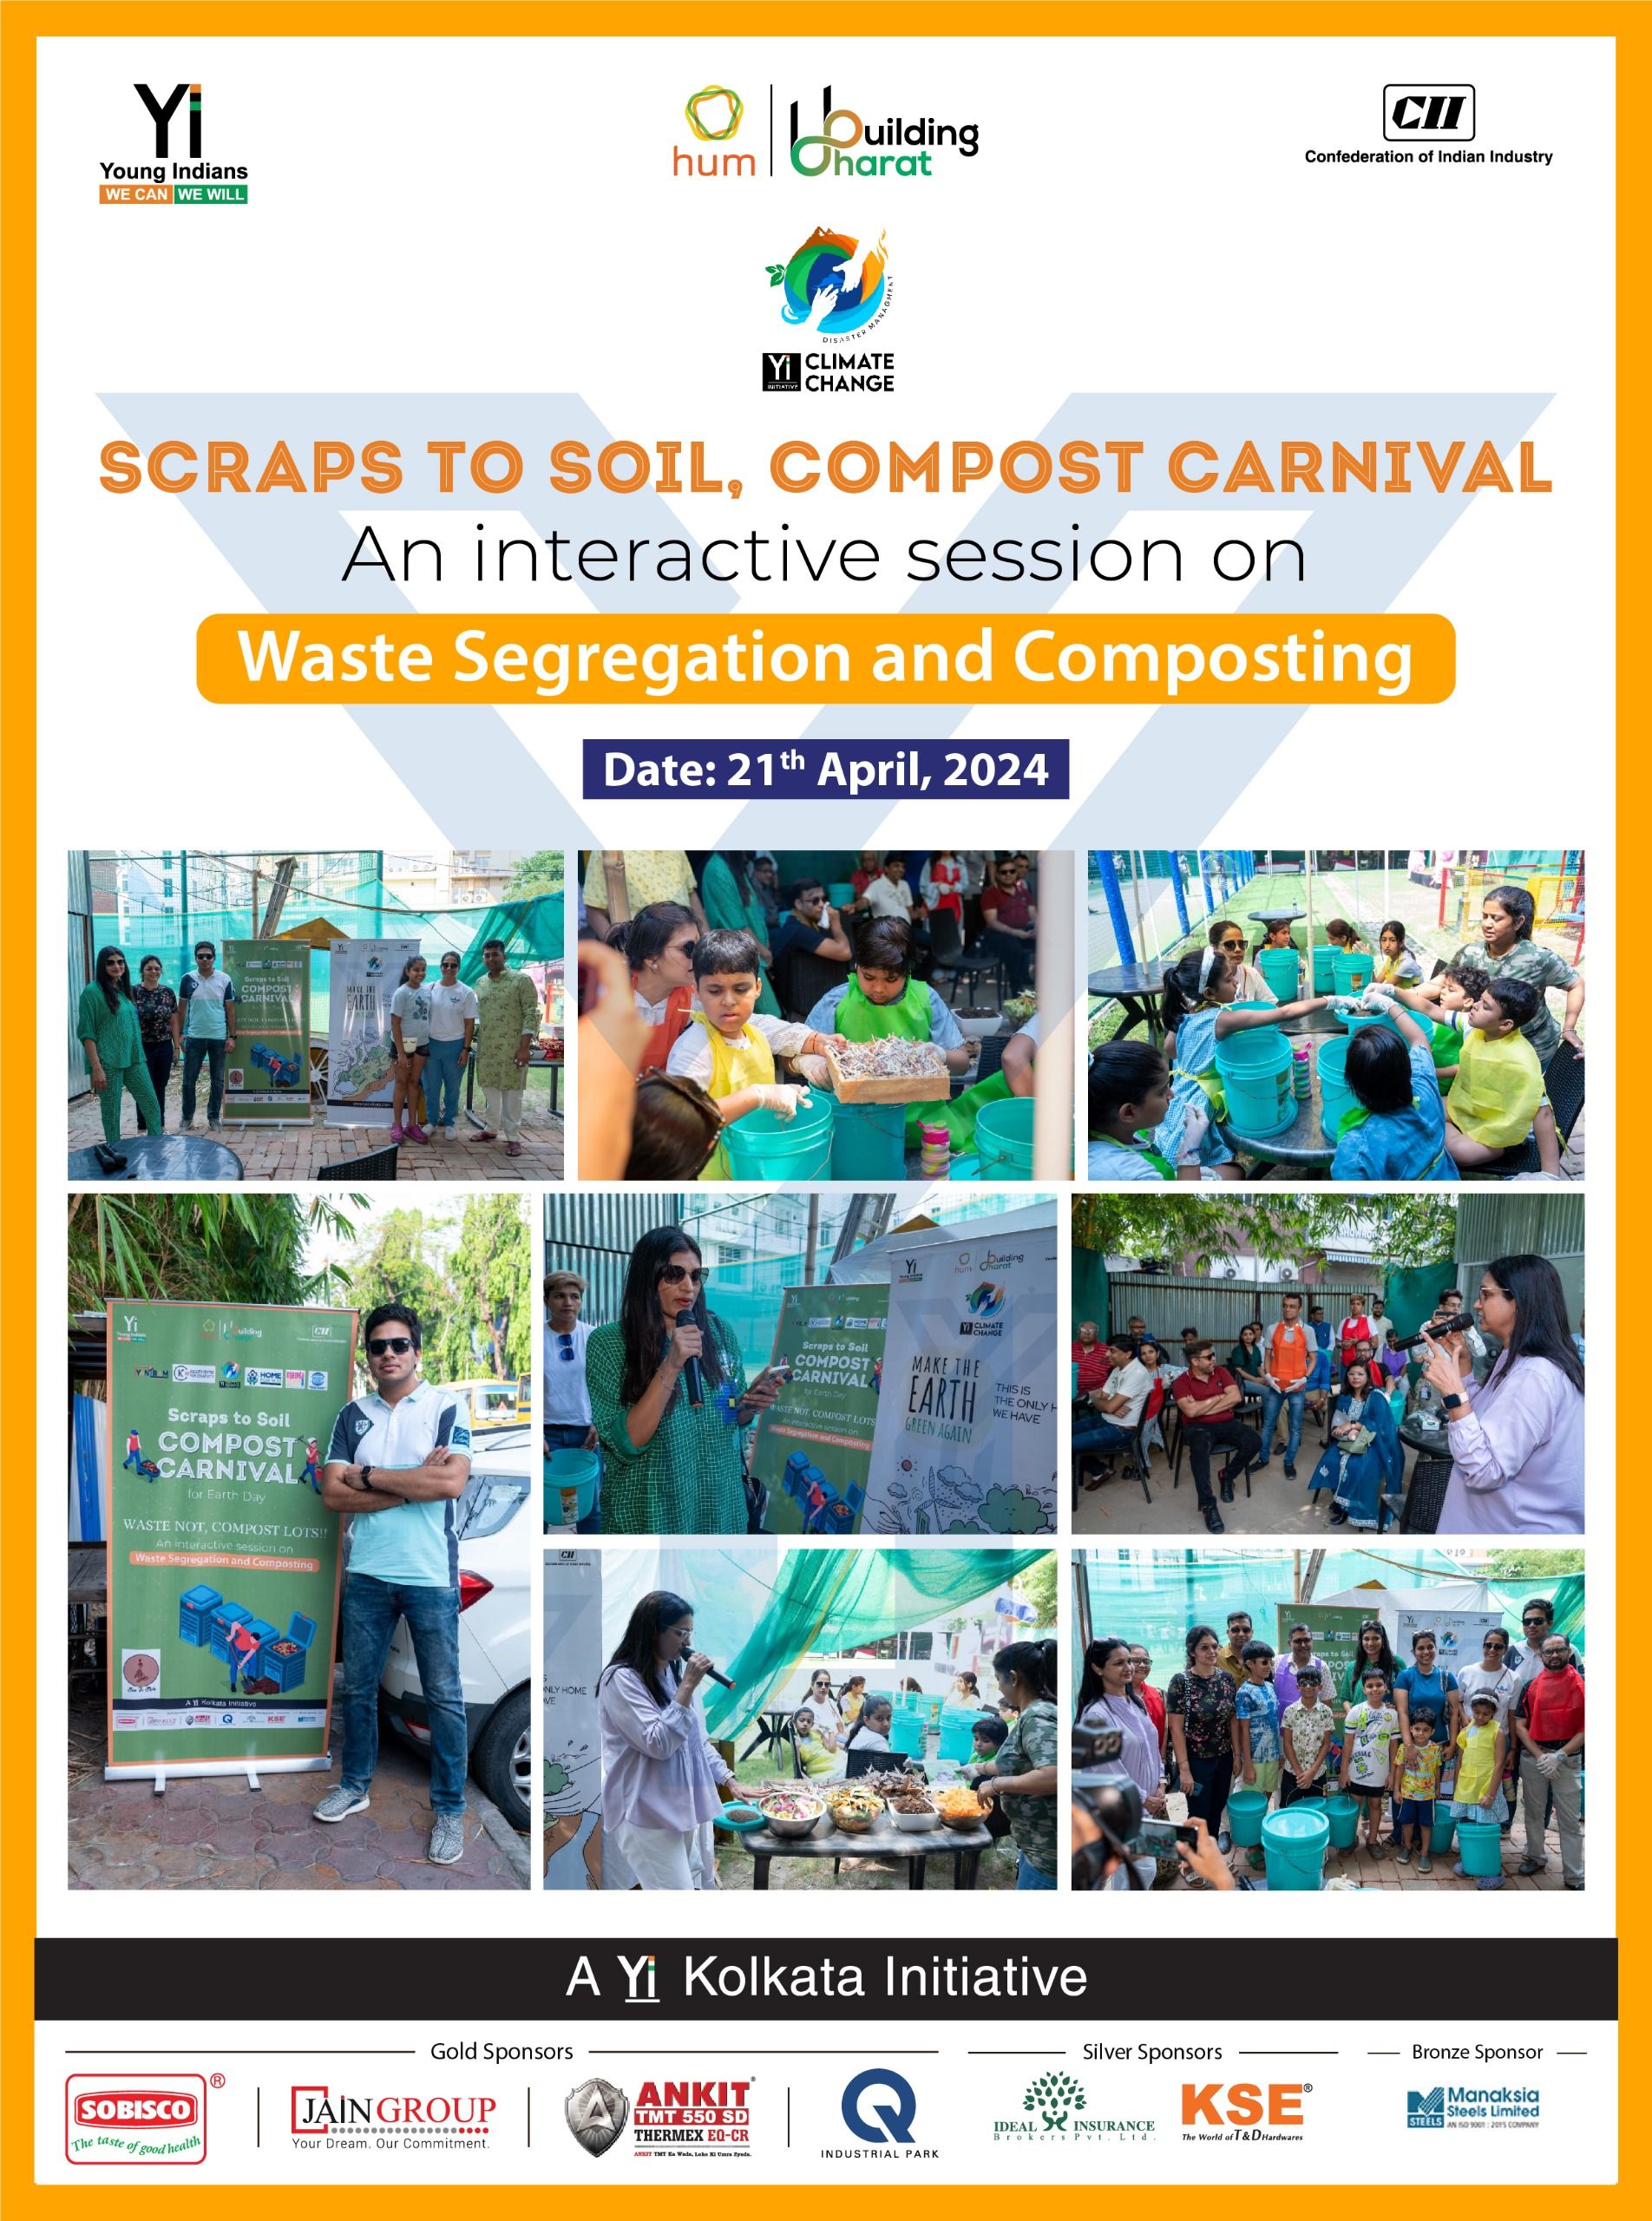 Yi24 | Climate Change - Scraps to Soil Compost Carnival